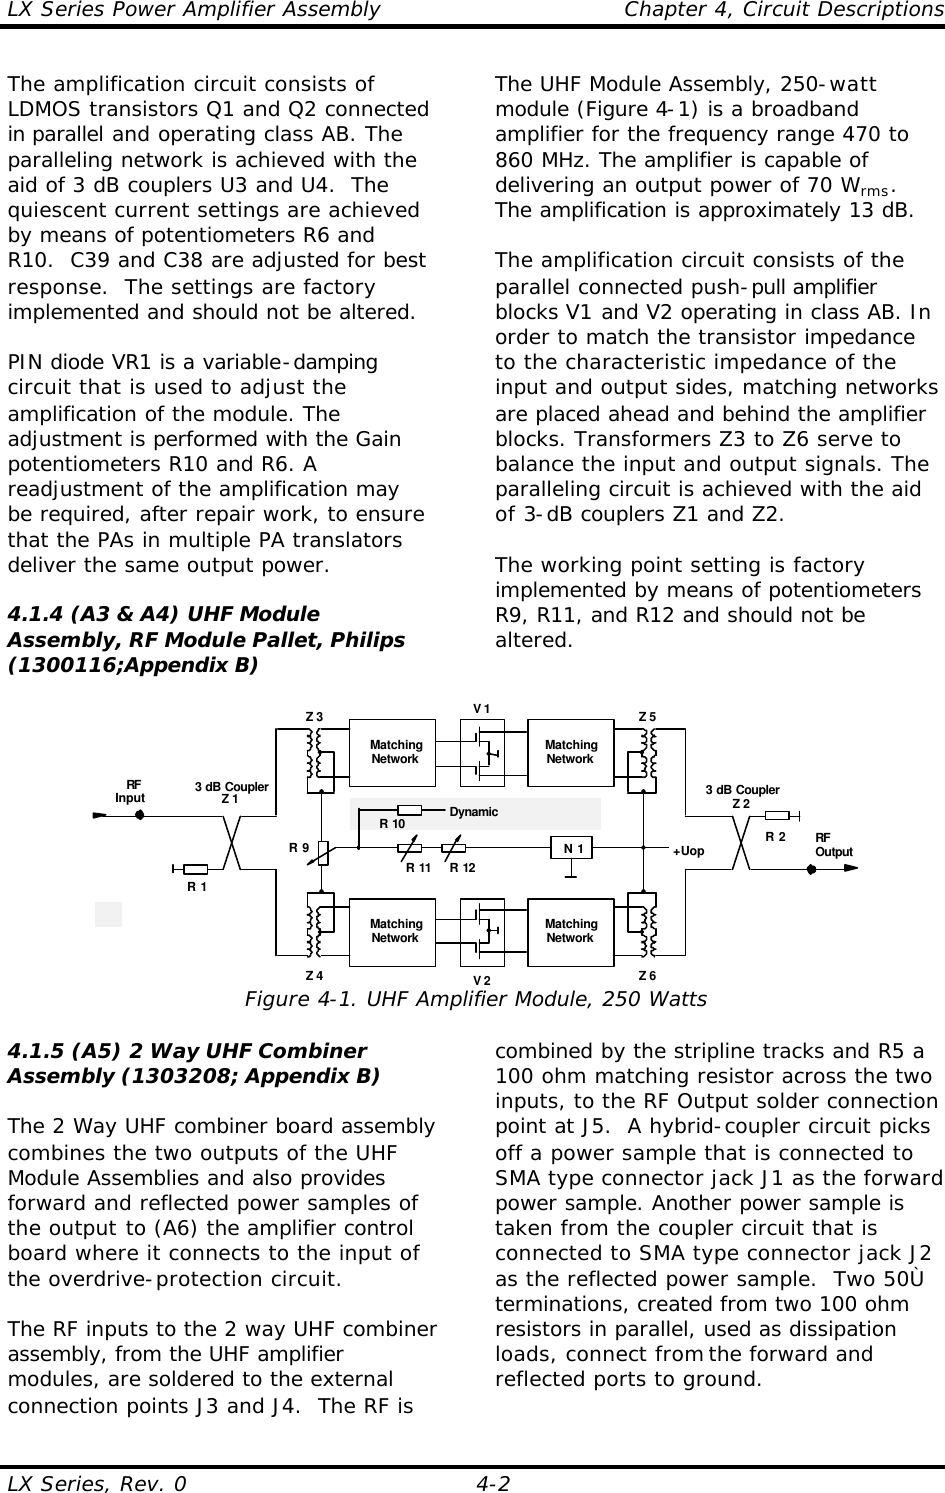 LX Series Power Amplifier Assembly    Chapter 4, Circuit Descriptions LX Series, Rev. 0    4-2 The amplification circuit consists of LDMOS transistors Q1 and Q2 connected in parallel and operating class AB. The paralleling network is achieved with the aid of 3 dB couplers U3 and U4.  The quiescent current settings are achieved by means of potentiometers R6 and R10.  C39 and C38 are adjusted for best response.  The settings are factory implemented and should not be altered.  PIN diode VR1 is a variable-damping circuit that is used to adjust the amplification of the module. The adjustment is performed with the Gain potentiometers R10 and R6. A readjustment of the amplification may be required, after repair work, to ensure that the PAs in multiple PA translators deliver the same output power.  4.1.4 (A3 &amp; A4) UHF Module Assembly, RF Module Pallet, Philips (1300116;Appendix B)  The UHF Module Assembly, 250-watt module (Figure 4-1) is a broadband amplifier for the frequency range 470 to 860 MHz. The amplifier is capable of delivering an output power of 70 Wrms. The amplification is approximately 13 dB.  The amplification circuit consists of the parallel connected push-pull amplifier blocks V1 and V2 operating in class AB. In order to match the transistor impedance to the characteristic impedance of the input and output sides, matching networks are placed ahead and behind the amplifier blocks. Transformers Z3 to Z6 serve to balance the input and output signals. The paralleling circuit is achieved with the aid of 3-dB couplers Z1 and Z2.  The working point setting is factory implemented by means of potentiometers R9, R11, and R12 and should not be altered.  V 13 dB CouplerZ 2RFOutputRFInput 3 dB CouplerZ 1R 2R 1MatchingNetworkMatchingNetworkV 2MatchingNetworkMatchingNetworkZ 3 Z 5Z 4 Z 6+UopN 1R 11 R 12R 9R 10 DynamicEqualization Figure 4-1. UHF Amplifier Module, 250 Watts 4.1.5 (A5) 2 Way UHF Combiner Assembly (1303208; Appendix B)  The 2 Way UHF combiner board assembly combines the two outputs of the UHF Module Assemblies and also provides forward and reflected power samples of the output to (A6) the amplifier control board where it connects to the input of the overdrive-protection circuit.  The RF inputs to the 2 way UHF combiner assembly, from the UHF amplifier modules, are soldered to the external connection points J3 and J4.  The RF is combined by the stripline tracks and R5 a 100 ohm matching resistor across the two inputs, to the RF Output solder connection point at J5.  A hybrid-coupler circuit picks off a power sample that is connected to SMA type connector jack J1 as the forward power sample. Another power sample is taken from the coupler circuit that is connected to SMA type connector jack J2 as the reflected power sample.  Two 50Ù terminations, created from two 100 ohm resistors in parallel, used as dissipation loads, connect from the forward and reflected ports to ground.  